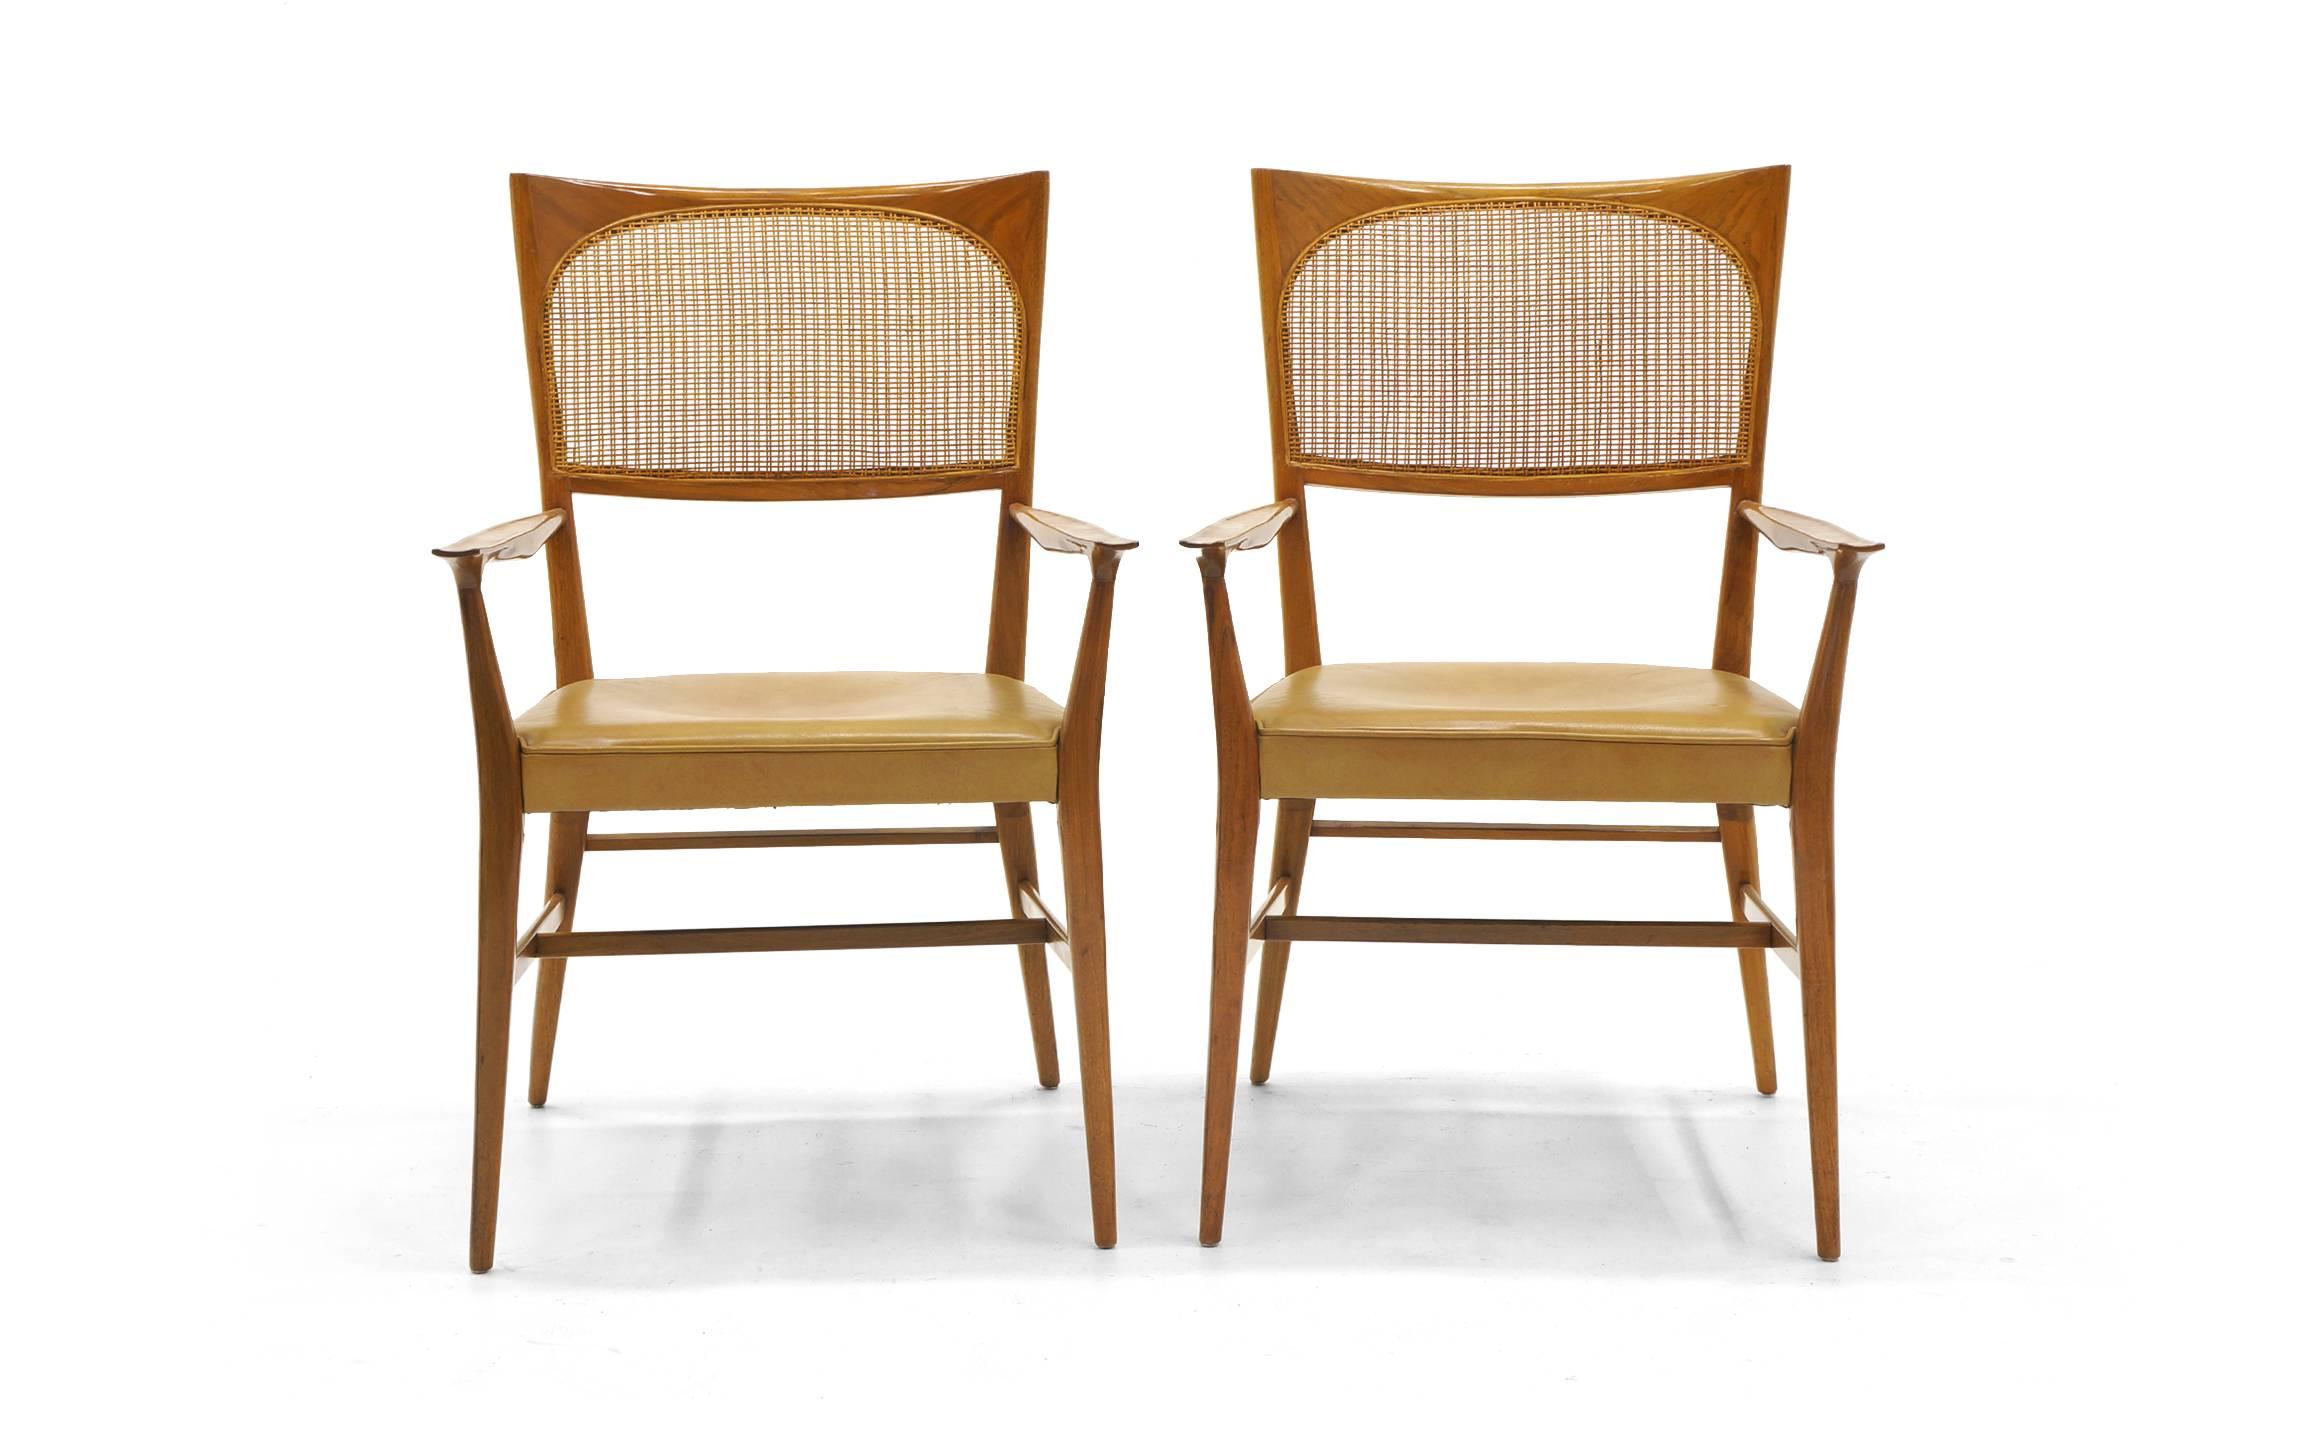 American Pair of Paul McCobb Dining chairs from The New England Collection.